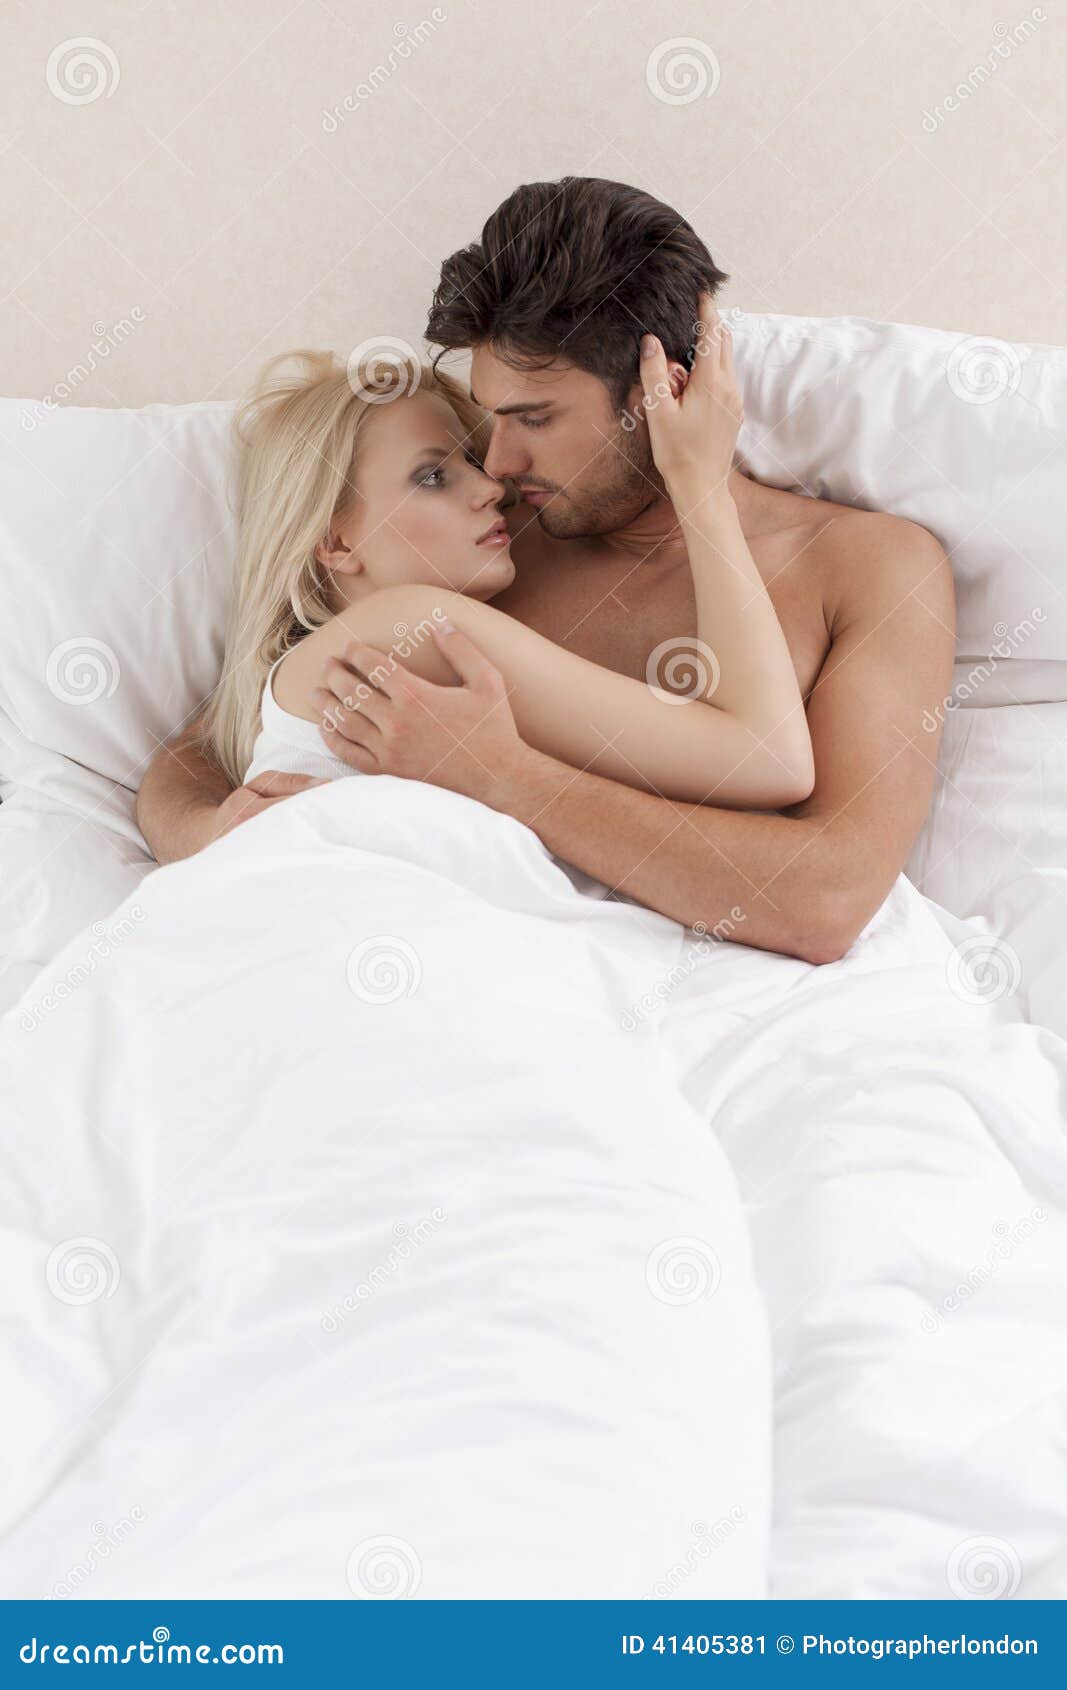 bran monica recommends images of snuggling in bed pic